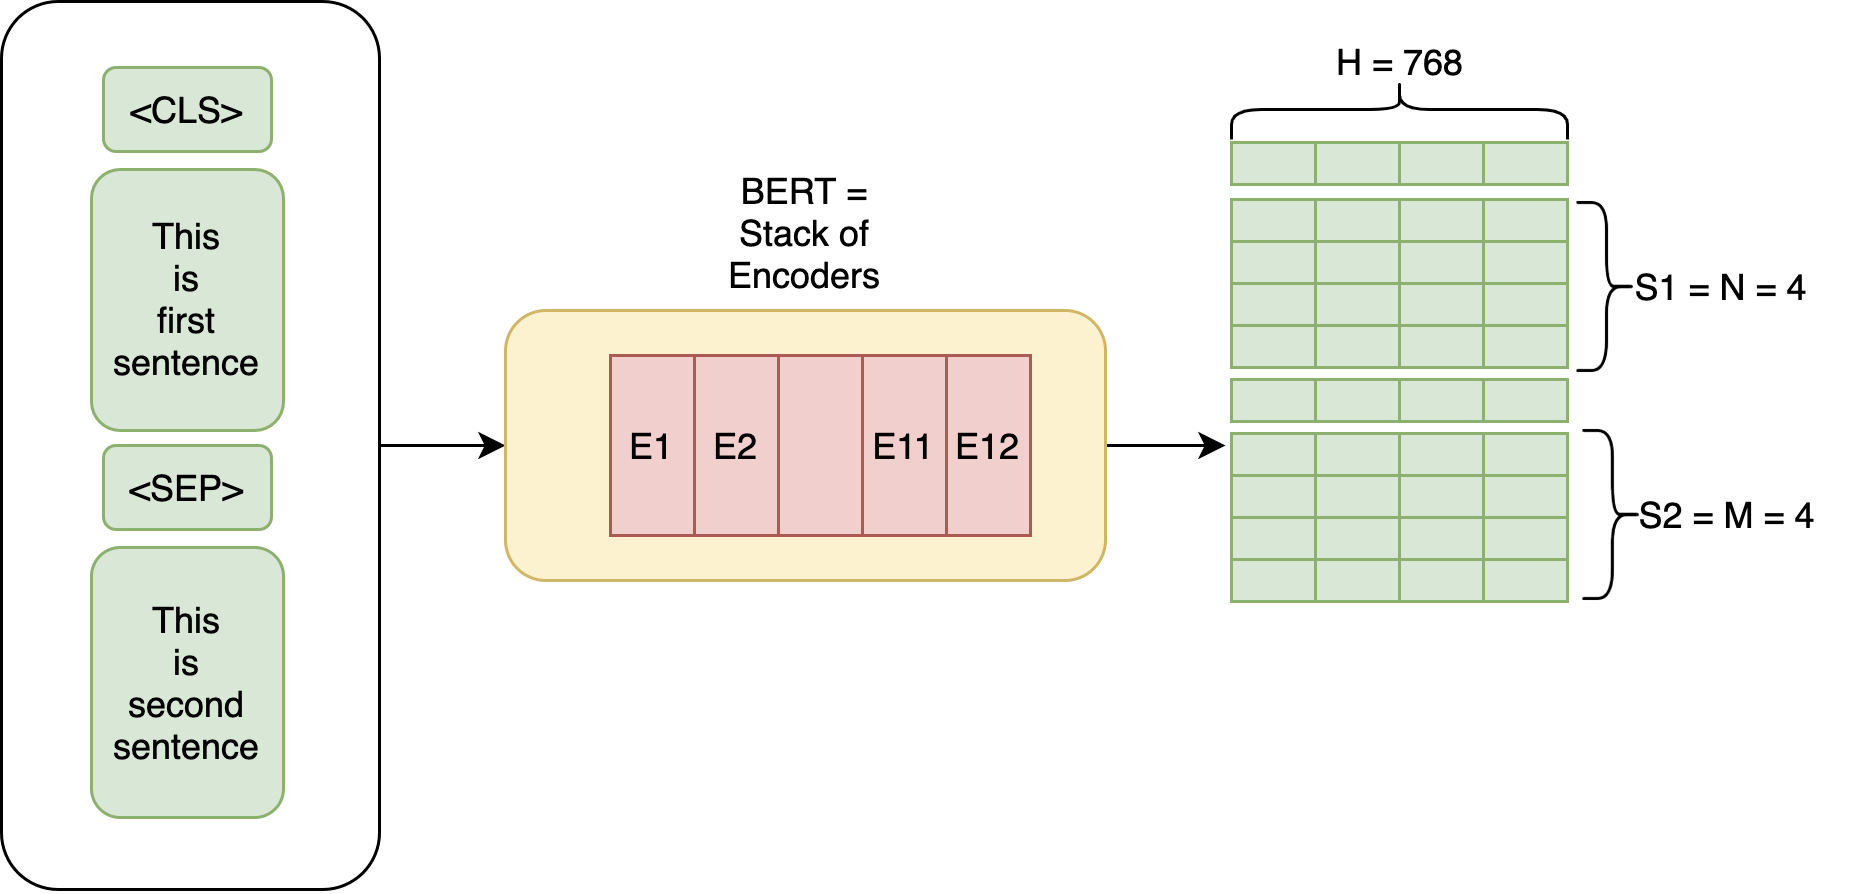 Author Image: BERT is just a stack of encoders